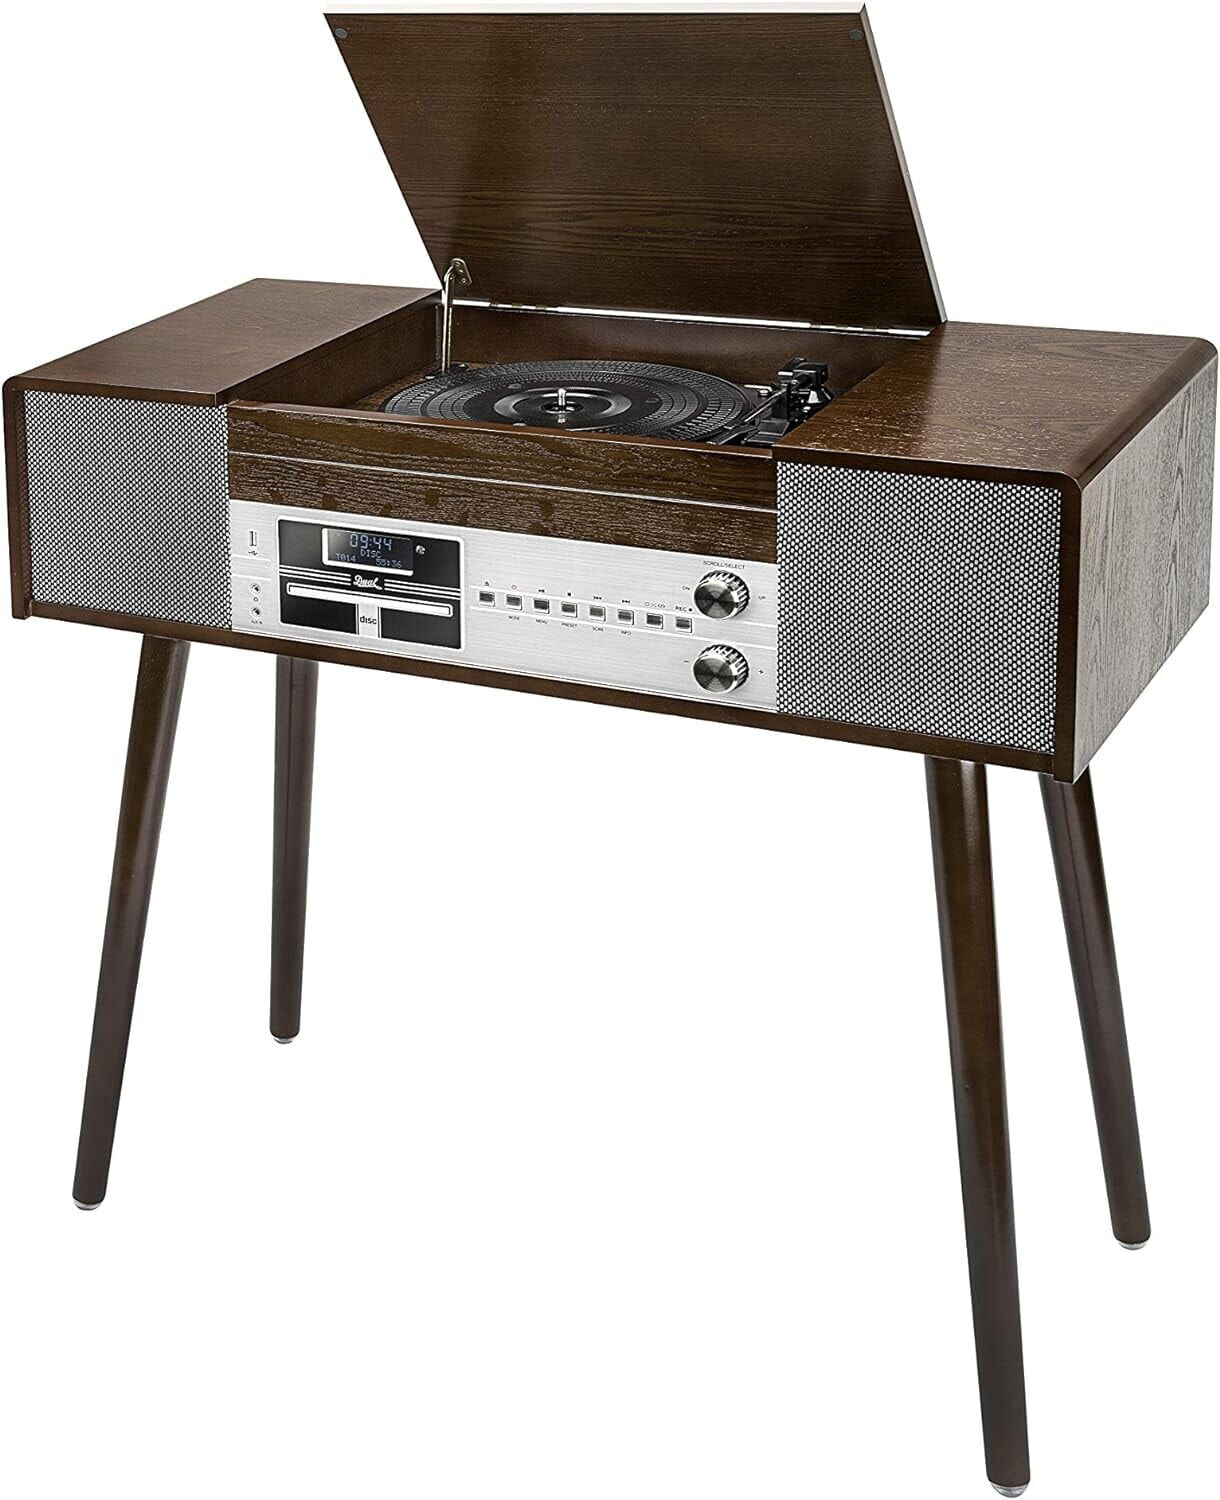 Dual NR 50 and DAB Stereo System with Record Player/UKW/DAB + Radio Cd Mp3/Usb/Kassettenabspieler, AUX-IN, Direct Encoding Function, Remote Control) brown